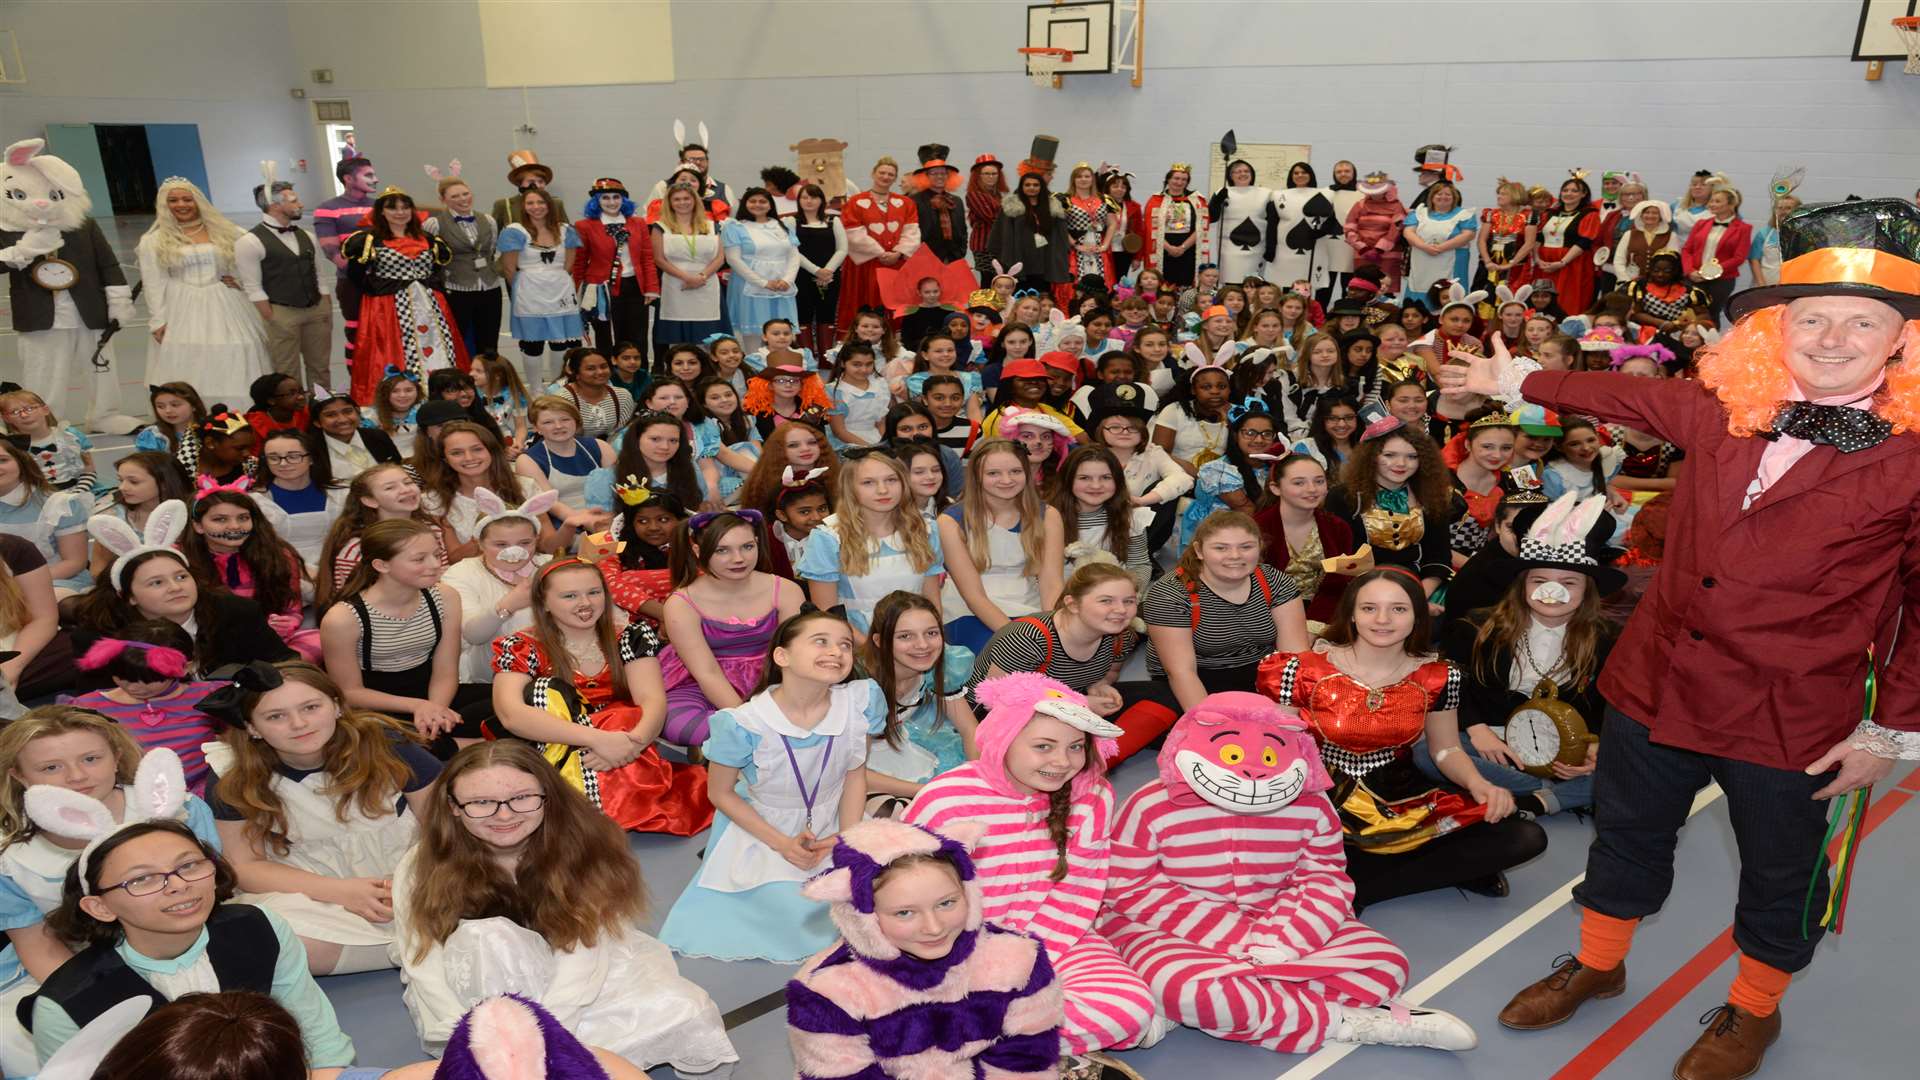 The school is now eagerly awaiting the outcome of The World Book Day challenge